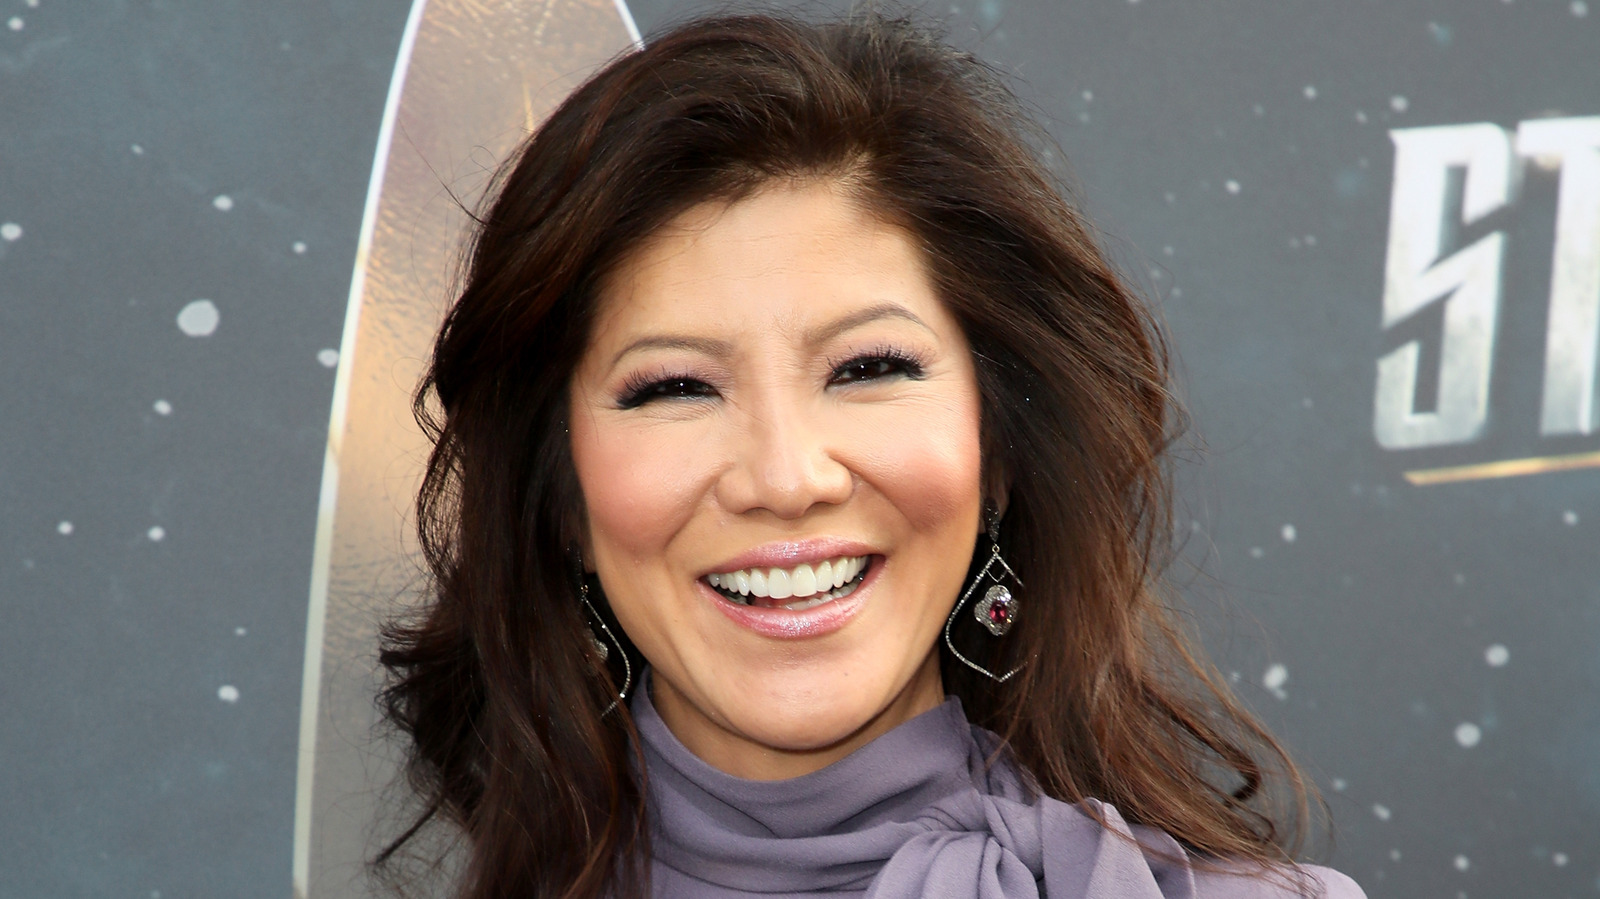 How Julie Chen Felt About Sharon Osbourne’s Dramatic Departure From The Talk